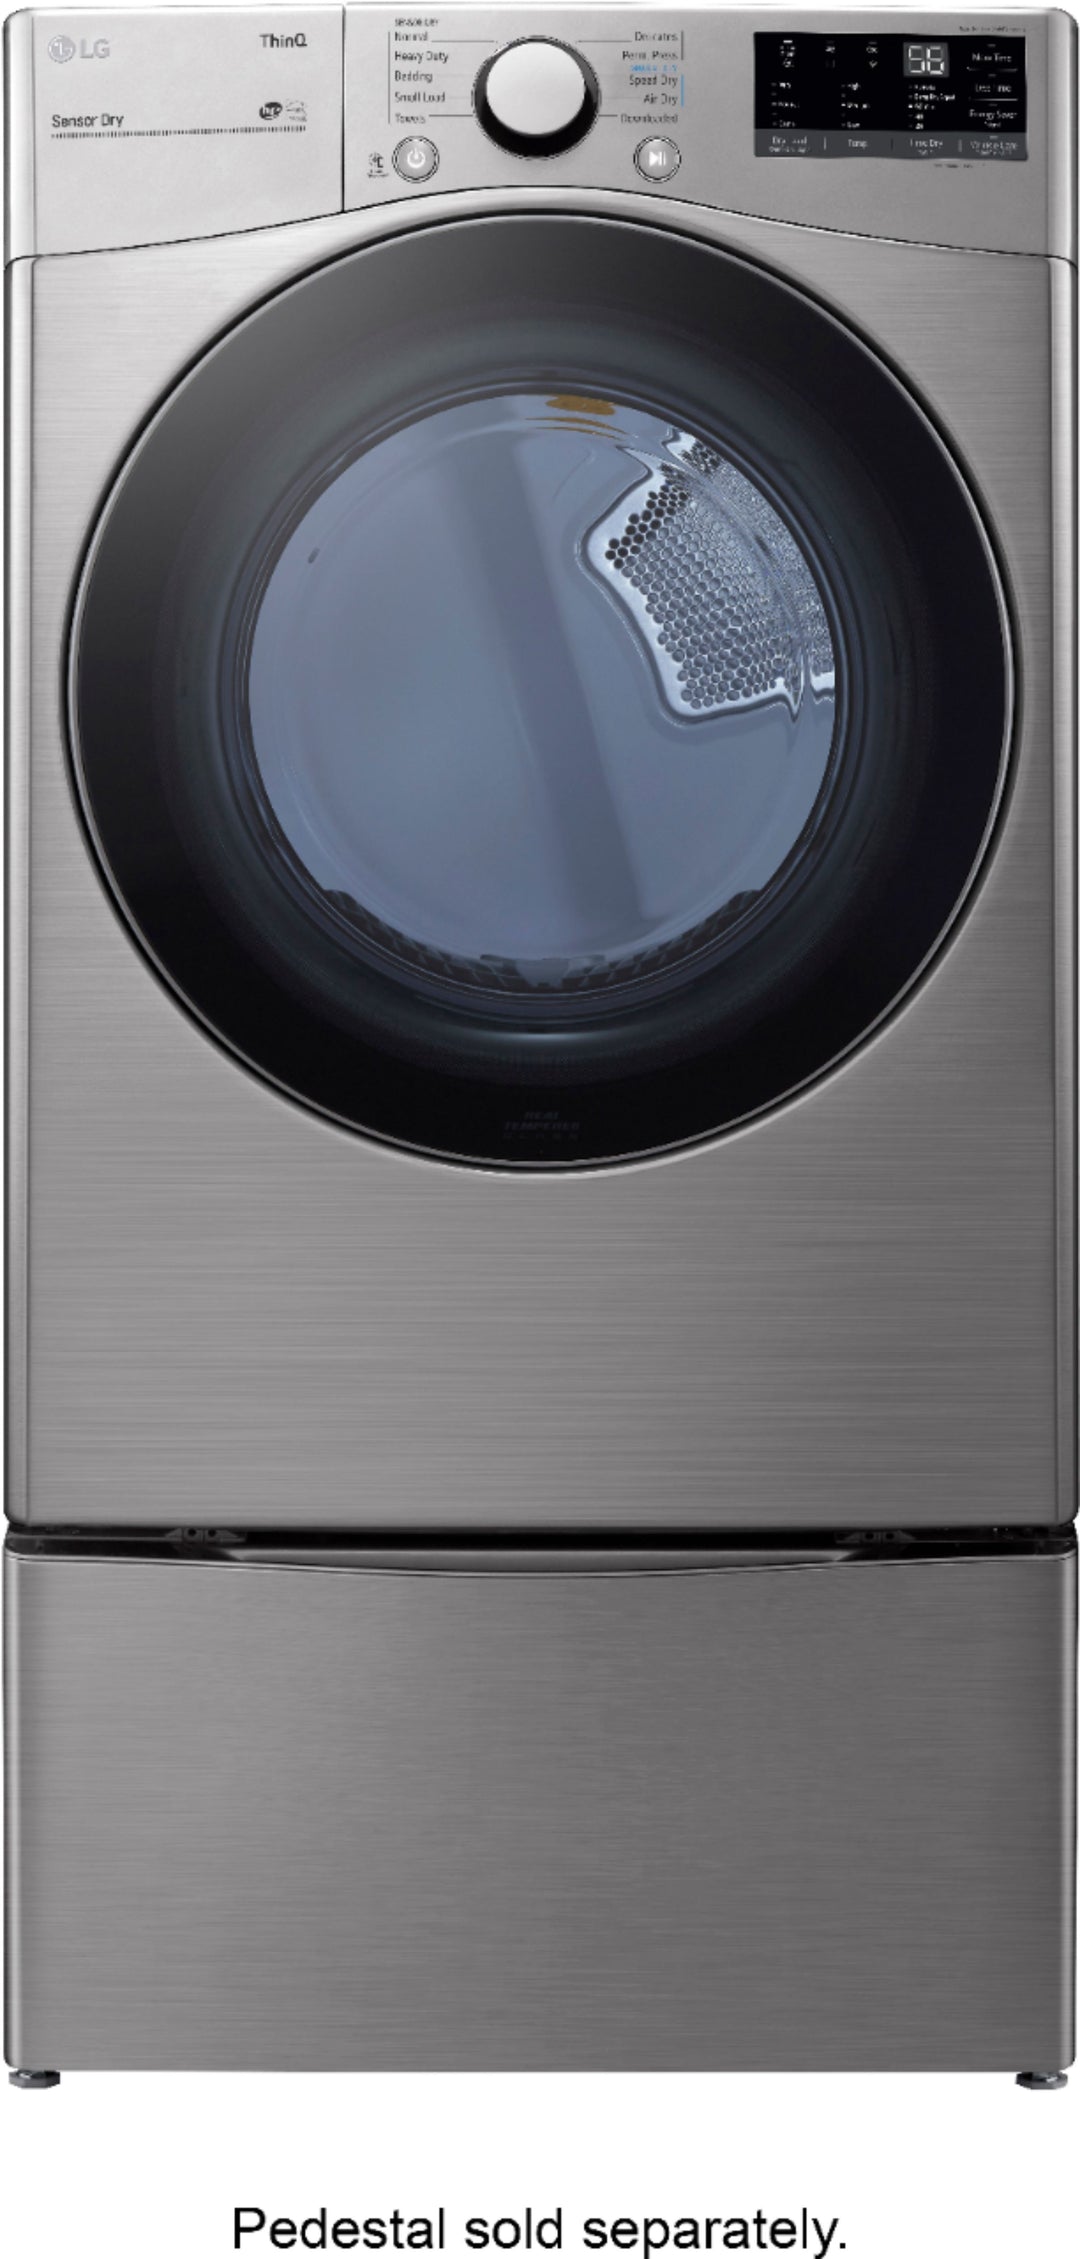 LG - 7.4 Cu. Ft. Stackable Smart Electric Dryer with Built In Intelligence - Graphite steel_4